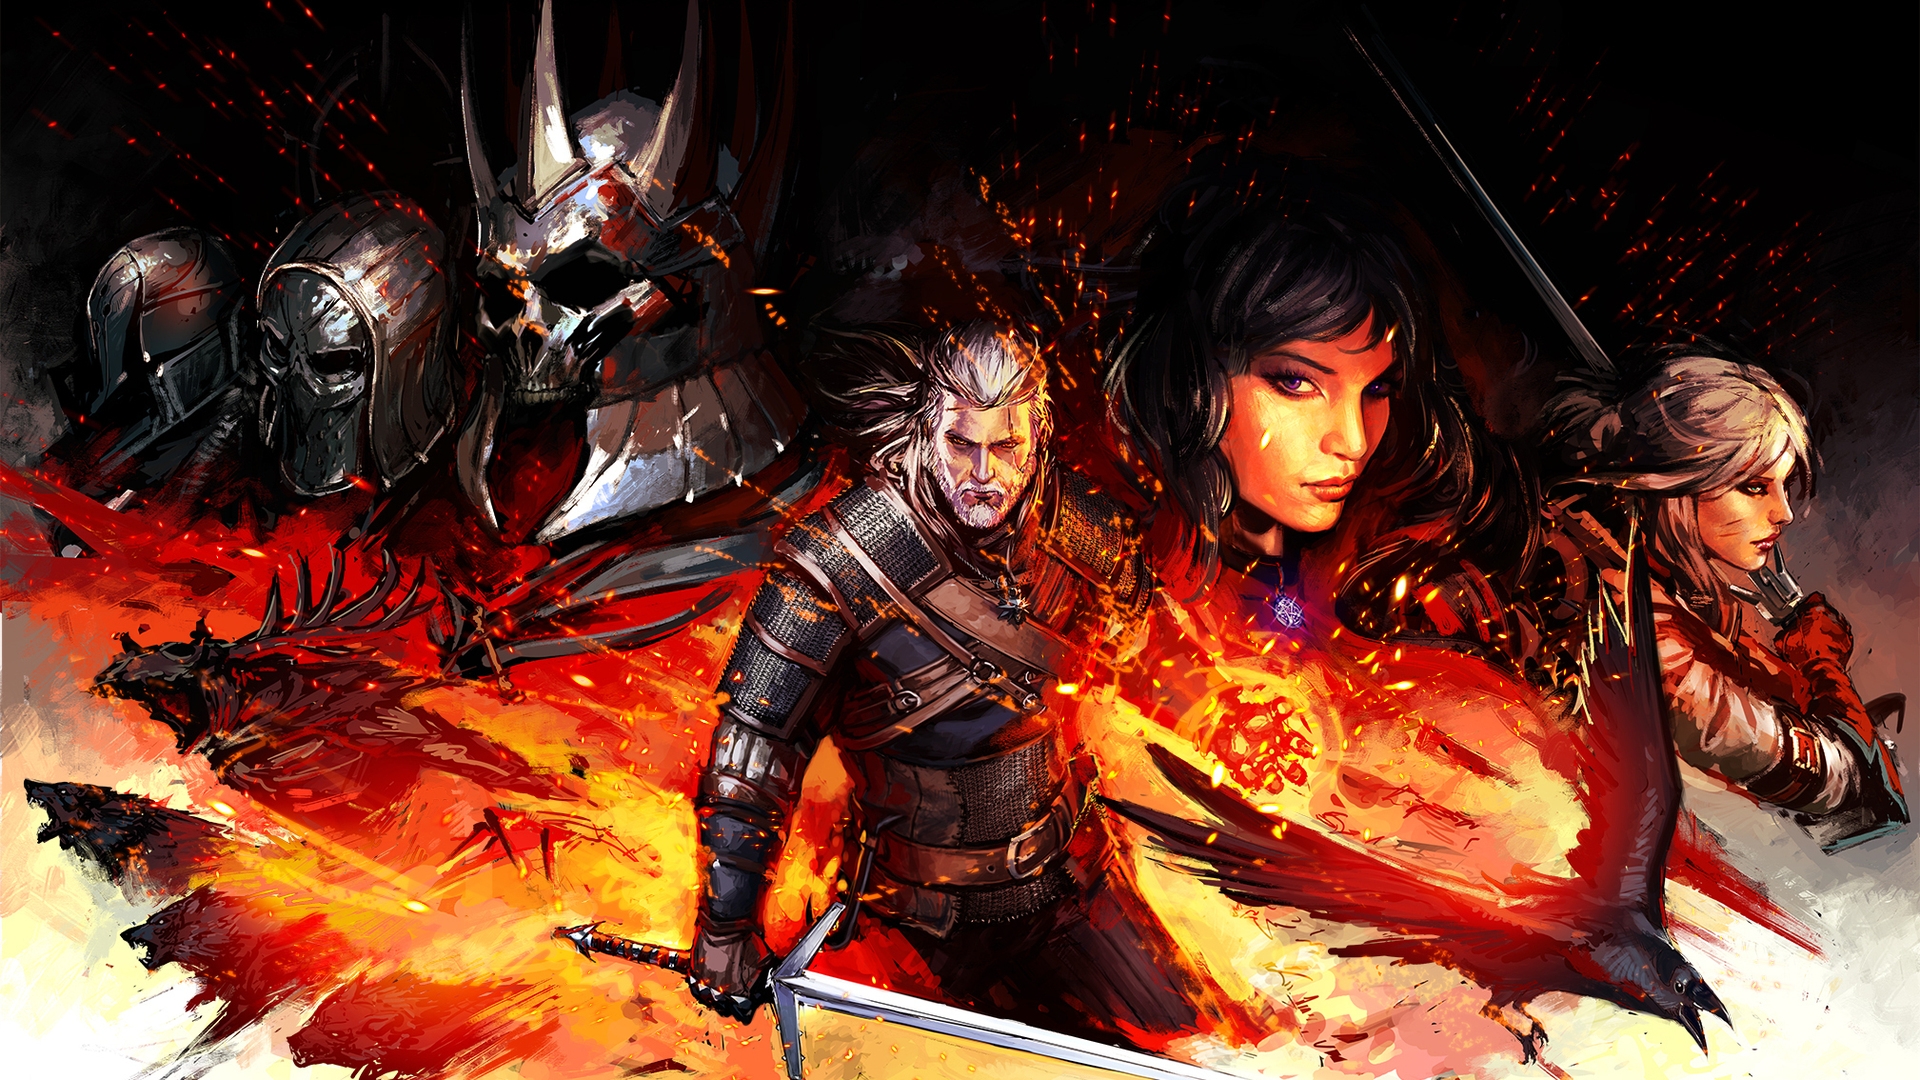 The Witcher 3 Wild Hunt Artwork for 1920 x 1080 HDTV 1080p resolution